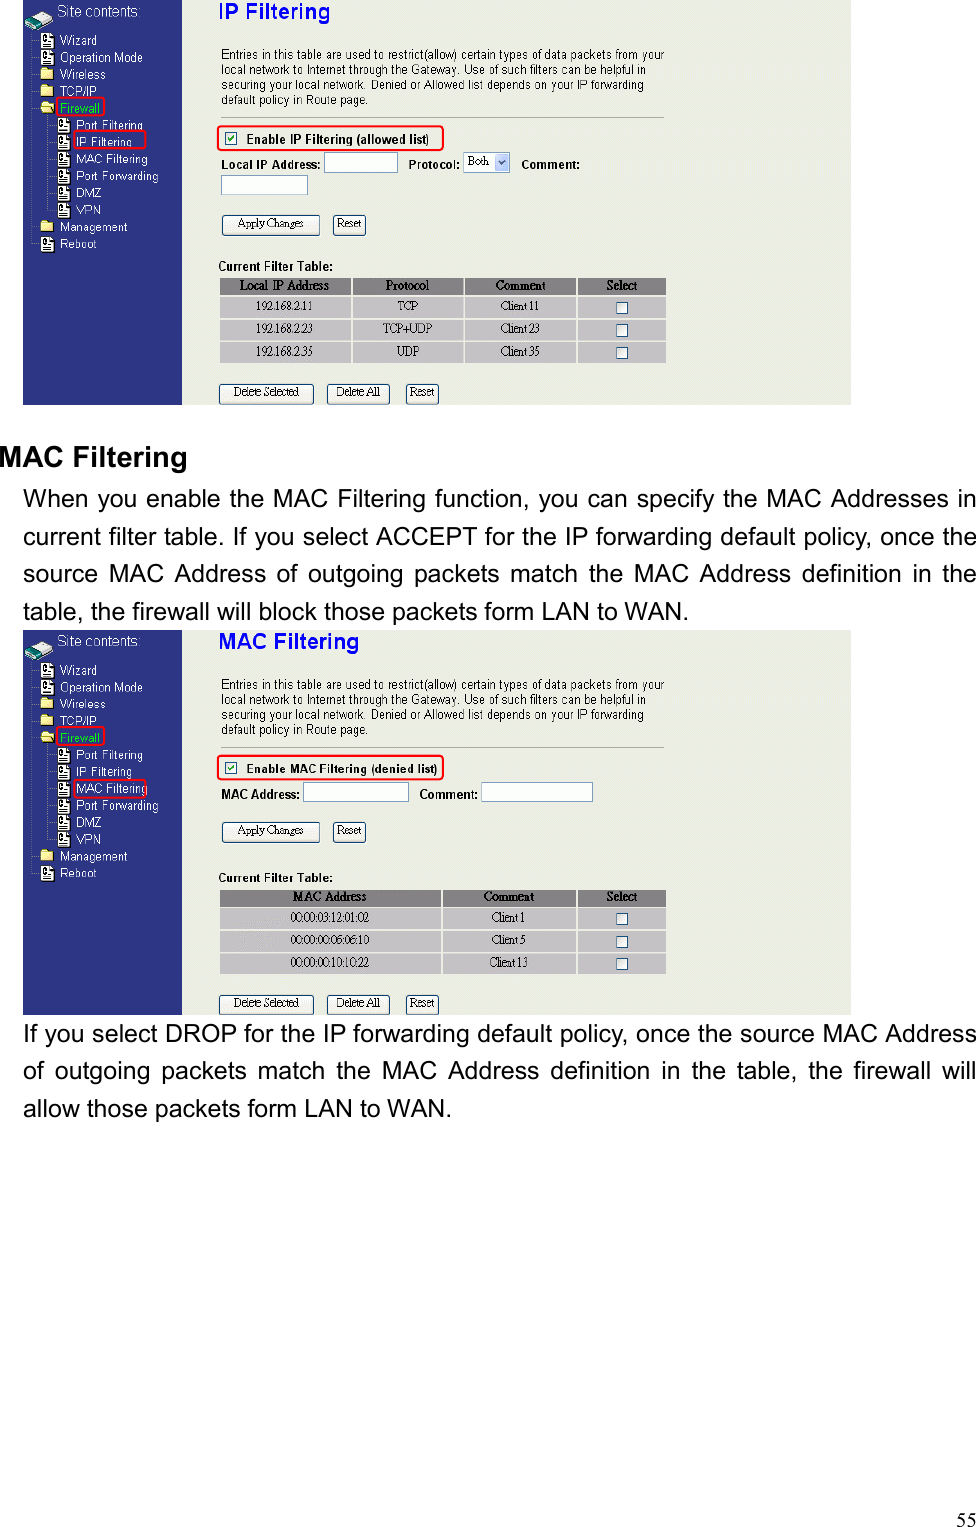  55  MAC Filtering When you enable the MAC Filtering function, you can specify the MAC Addresses in current filter table. If you select ACCEPT for the IP forwarding default policy, once the source MAC Address of outgoing packets match the MAC Address definition in the table, the firewall will block those packets form LAN to WAN.  If you select DROP for the IP forwarding default policy, once the source MAC Address of outgoing packets match the MAC Address definition in the table, the firewall will allow those packets form LAN to WAN. 